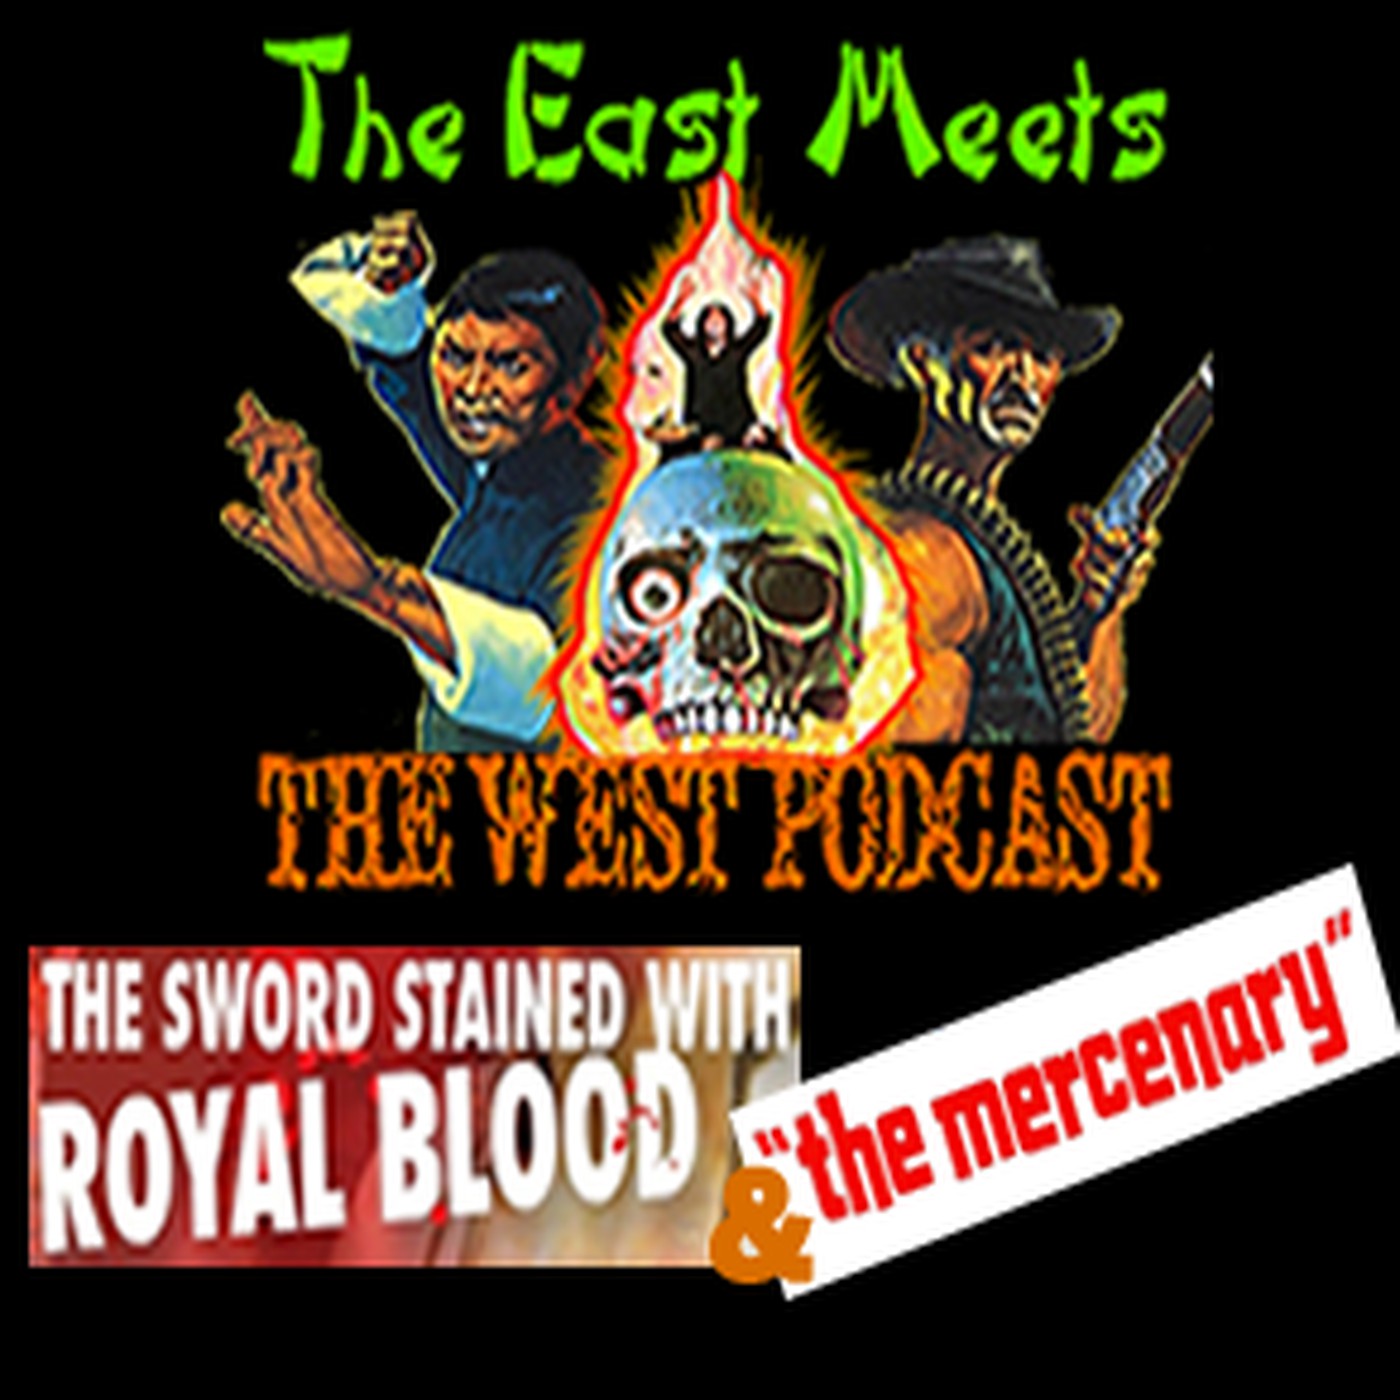 The East Meets the West Ep. 19 - Sword Stained with Royal Blood (1981) & The Mercenary (1968)